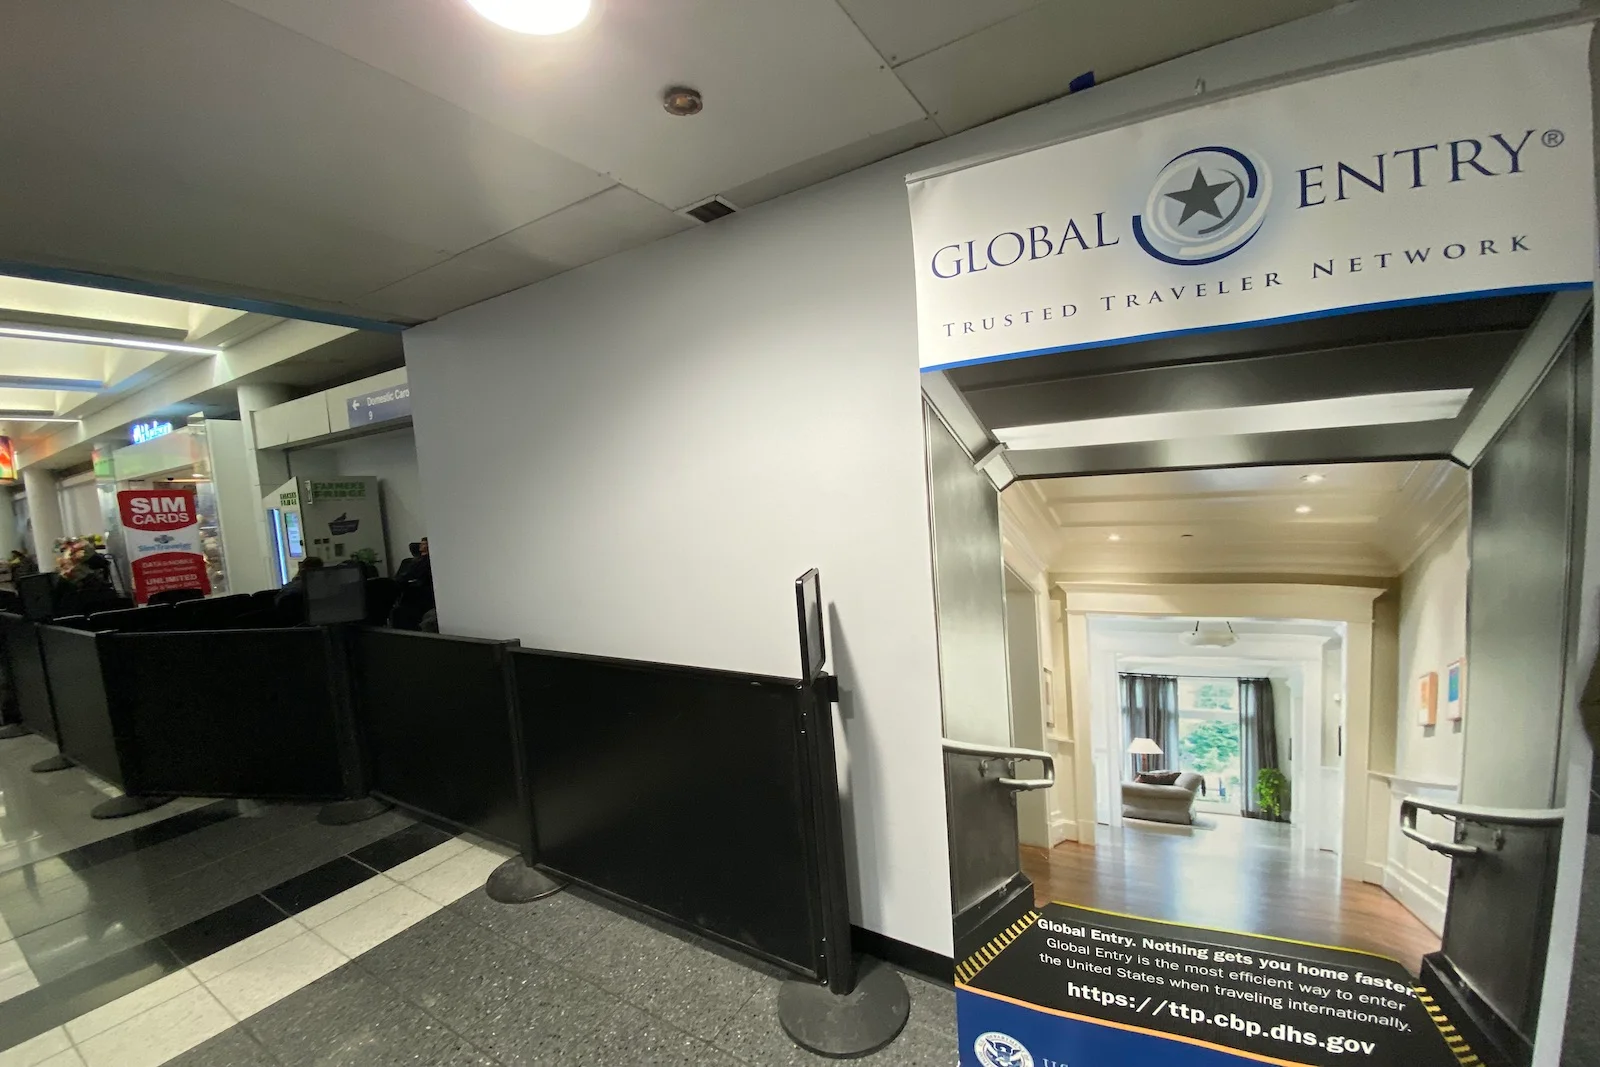 If you have been having trouble locating an interview for Global Entry, you should try the following.